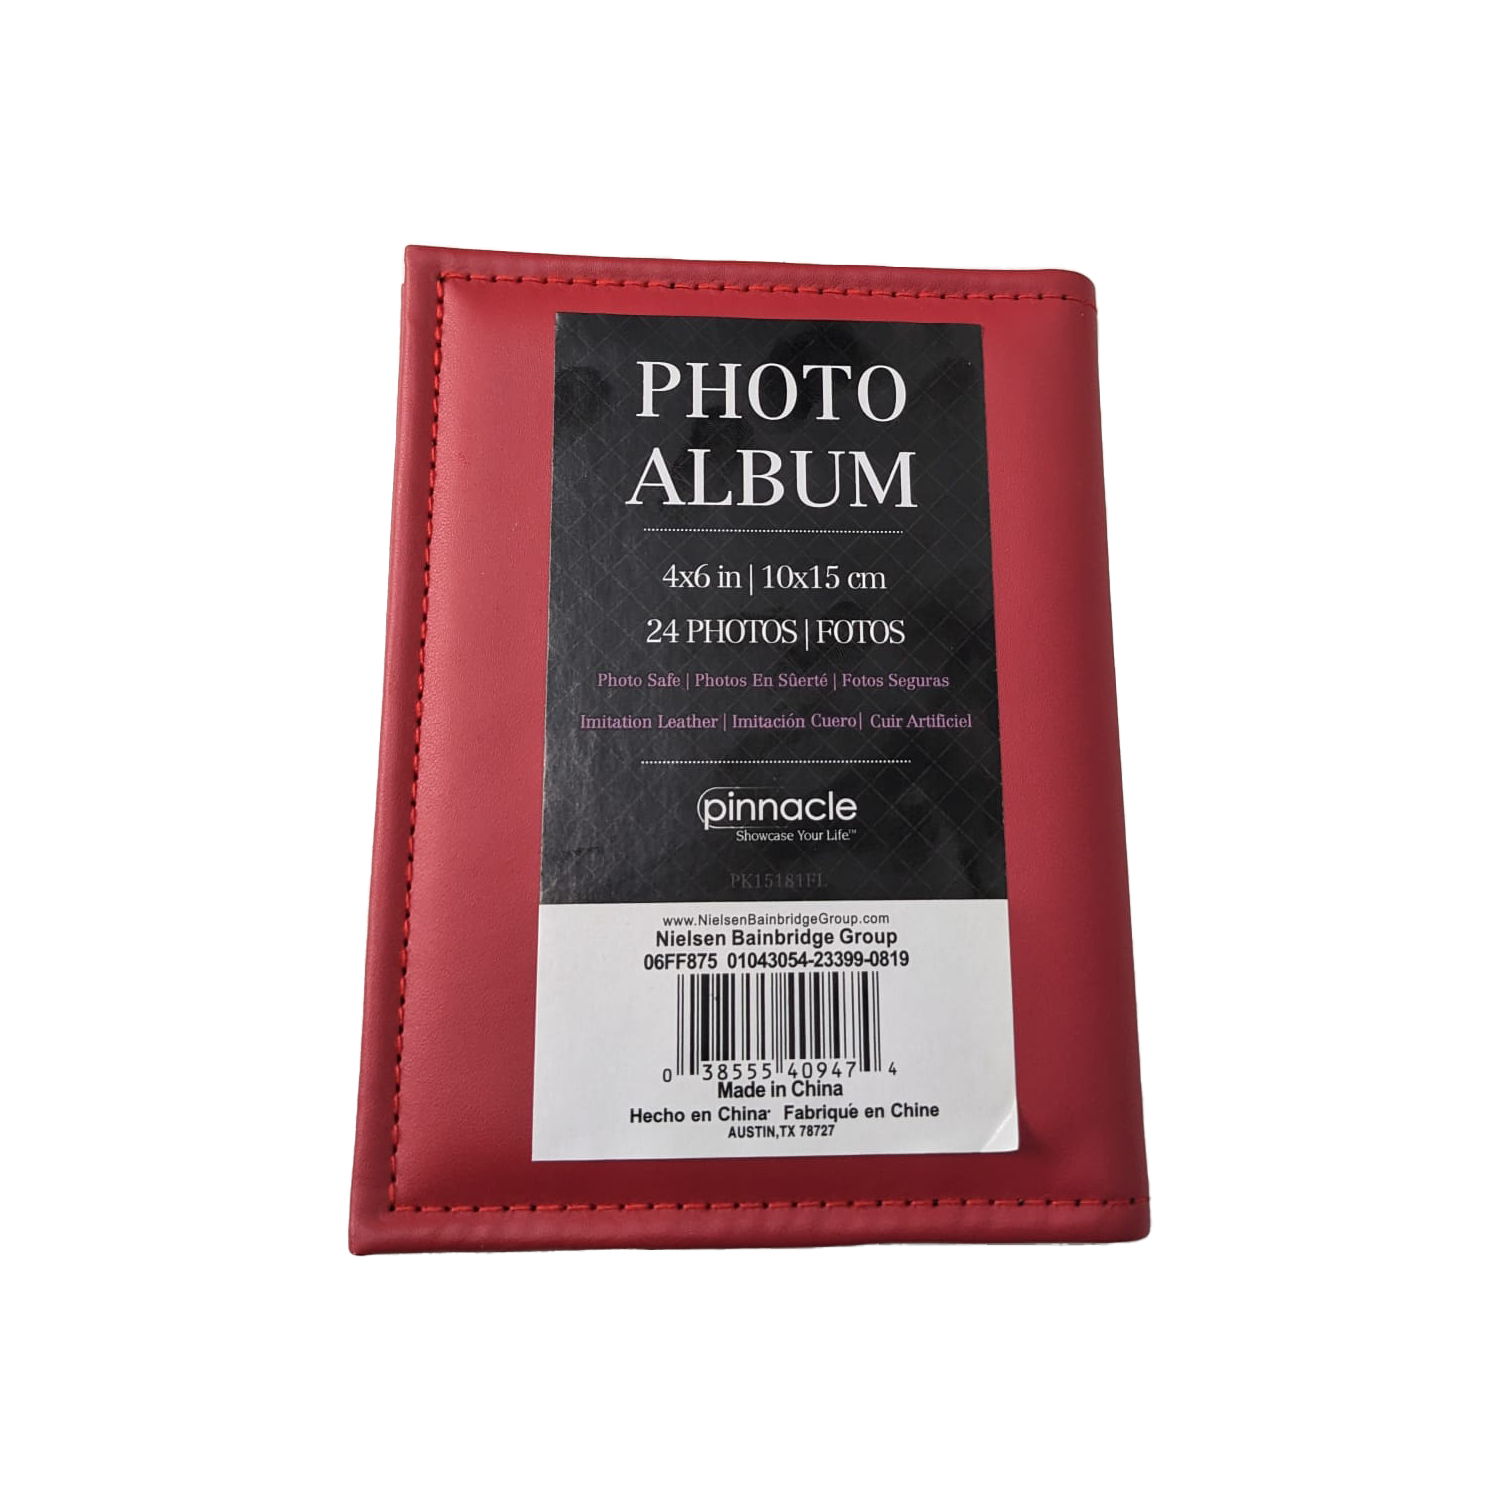 Pinnacle  photo Album 4x6 24 Photos Faux leather - RED, NAVY, BLACK or BROWN